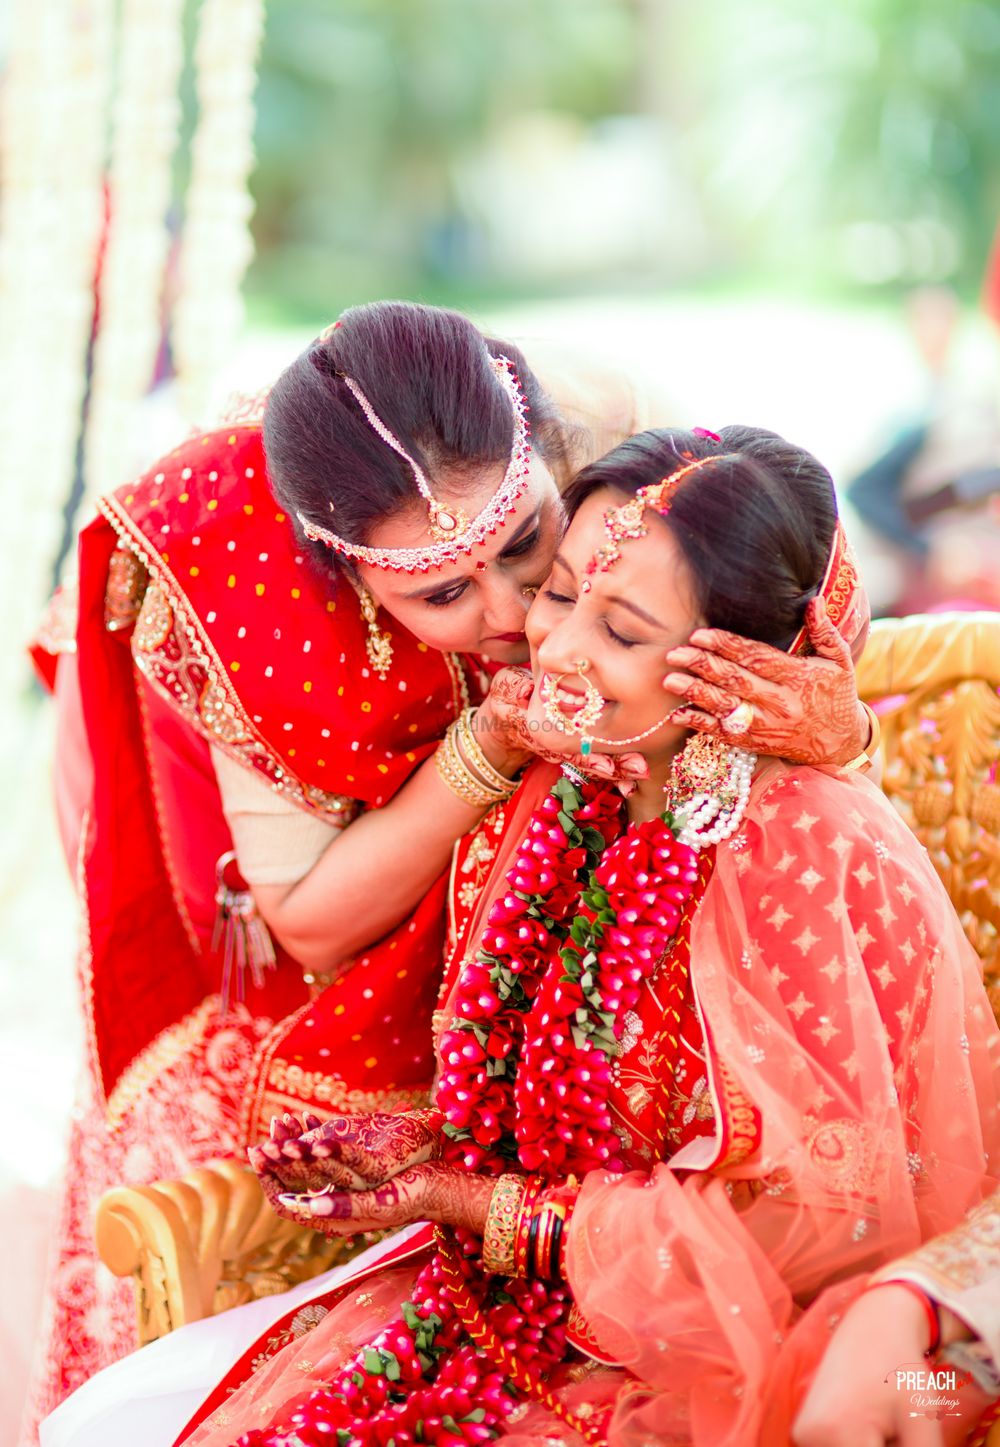 Photo By Nupur Dave Wedding | Portrait Photography - Photographers